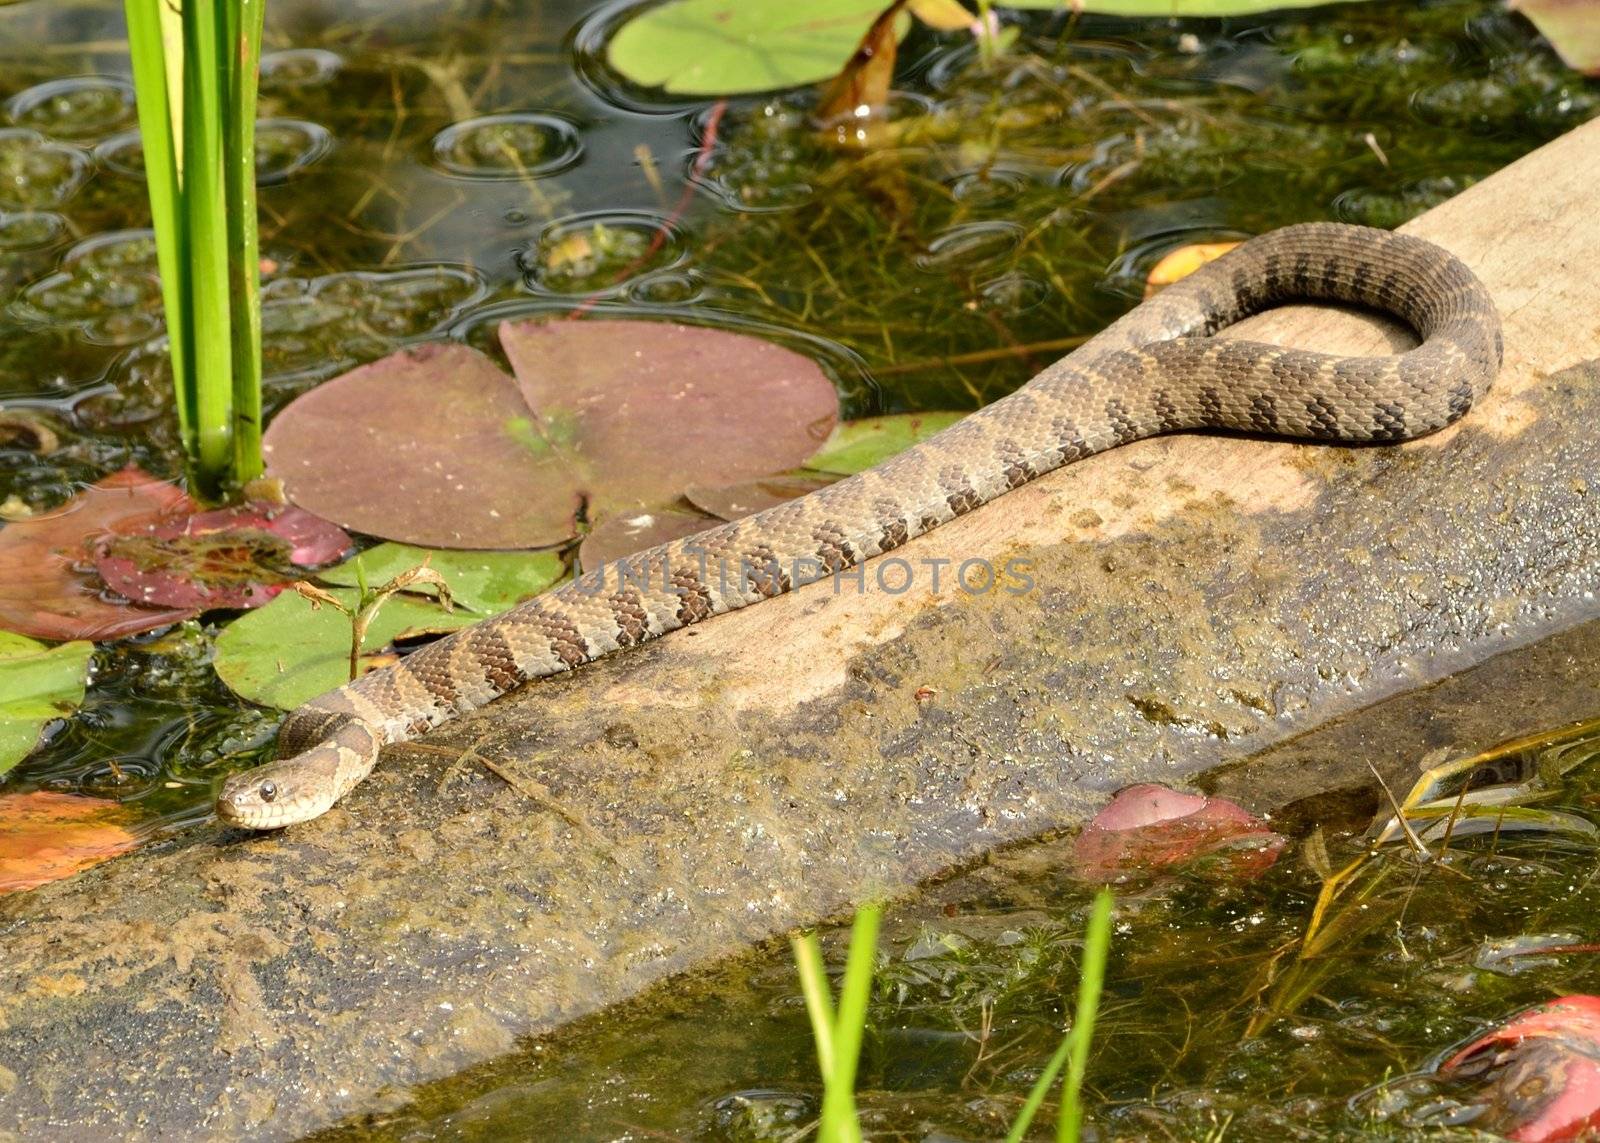 Northern Water Snake by brm1949